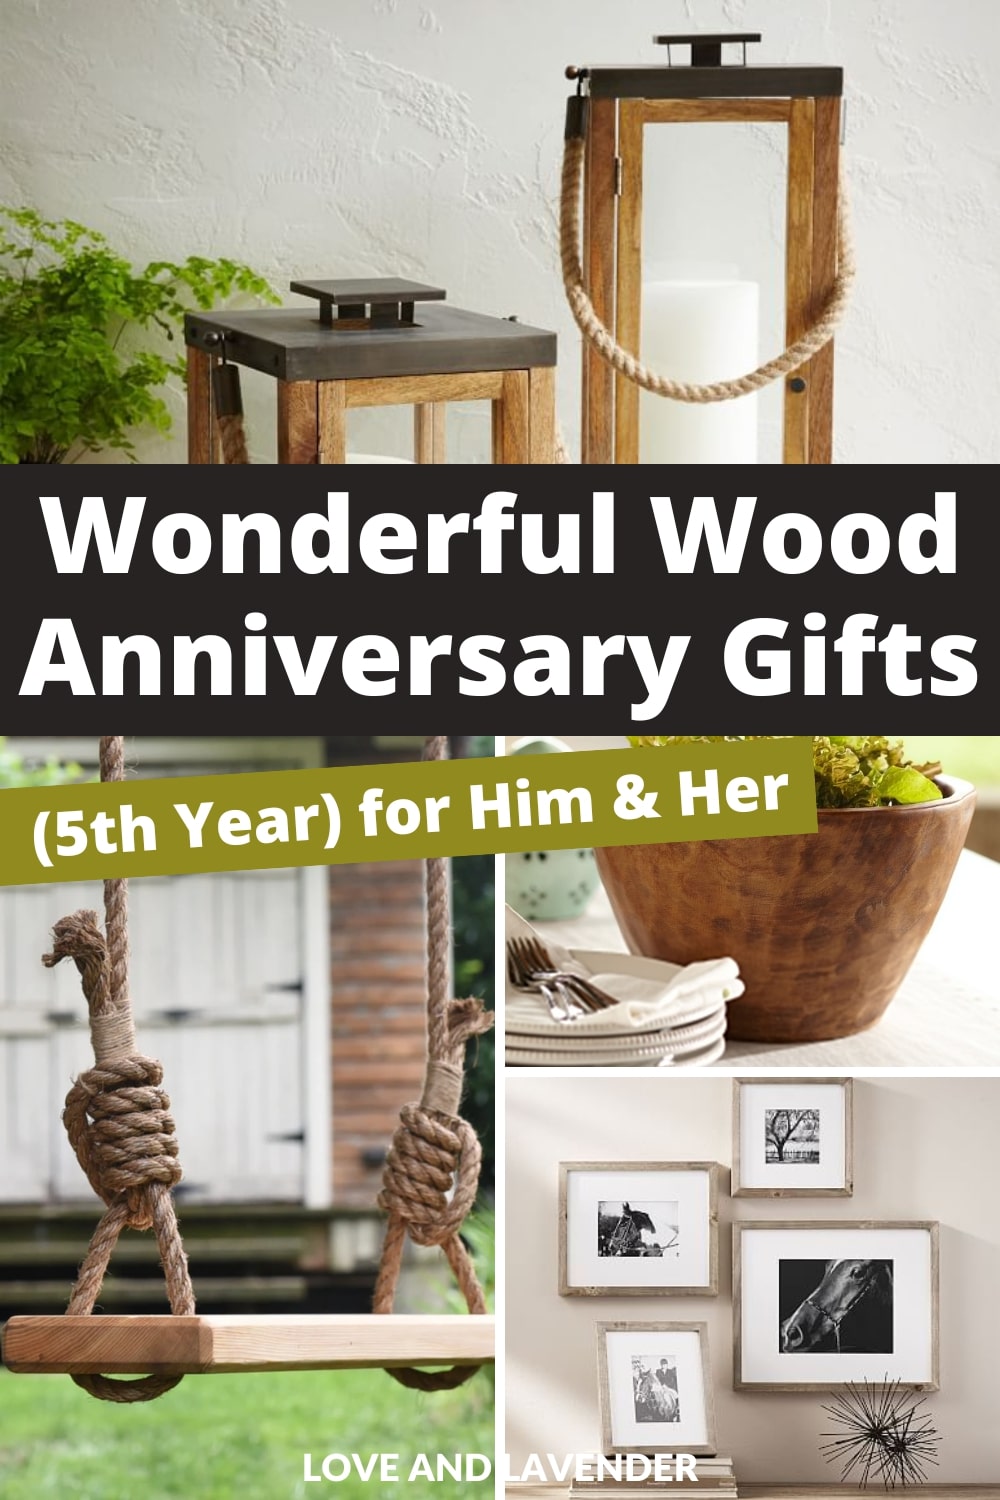 19 Wonderful Wood Anniversary Gifts (5th Year) for Him & Her